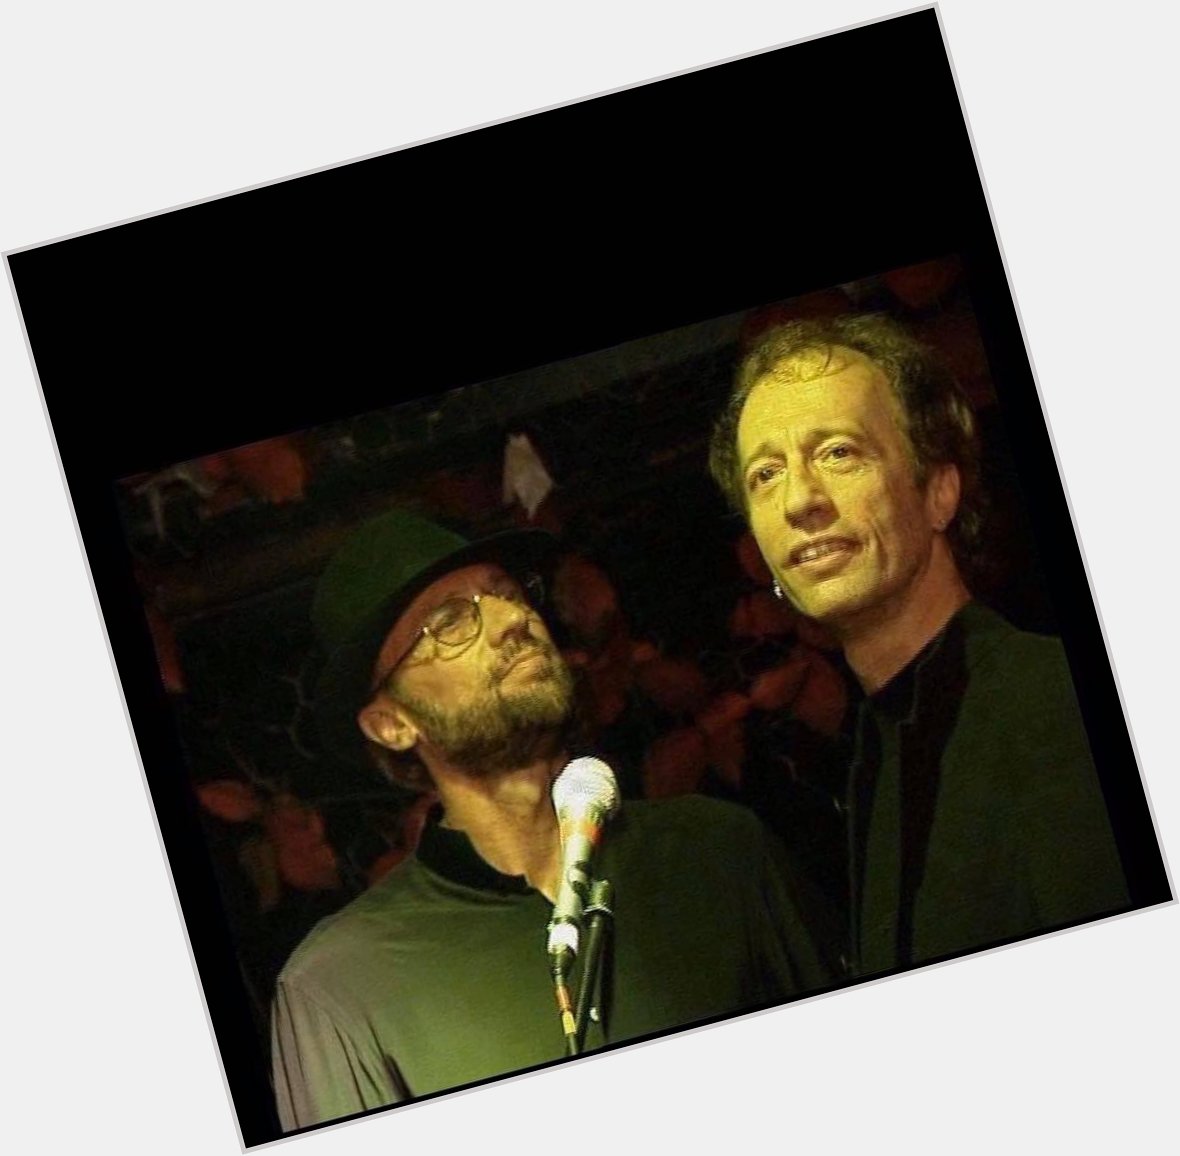 Sharing this great picture of Robin and Maurice Gibb wishing them a heavenly happy birthday!!    